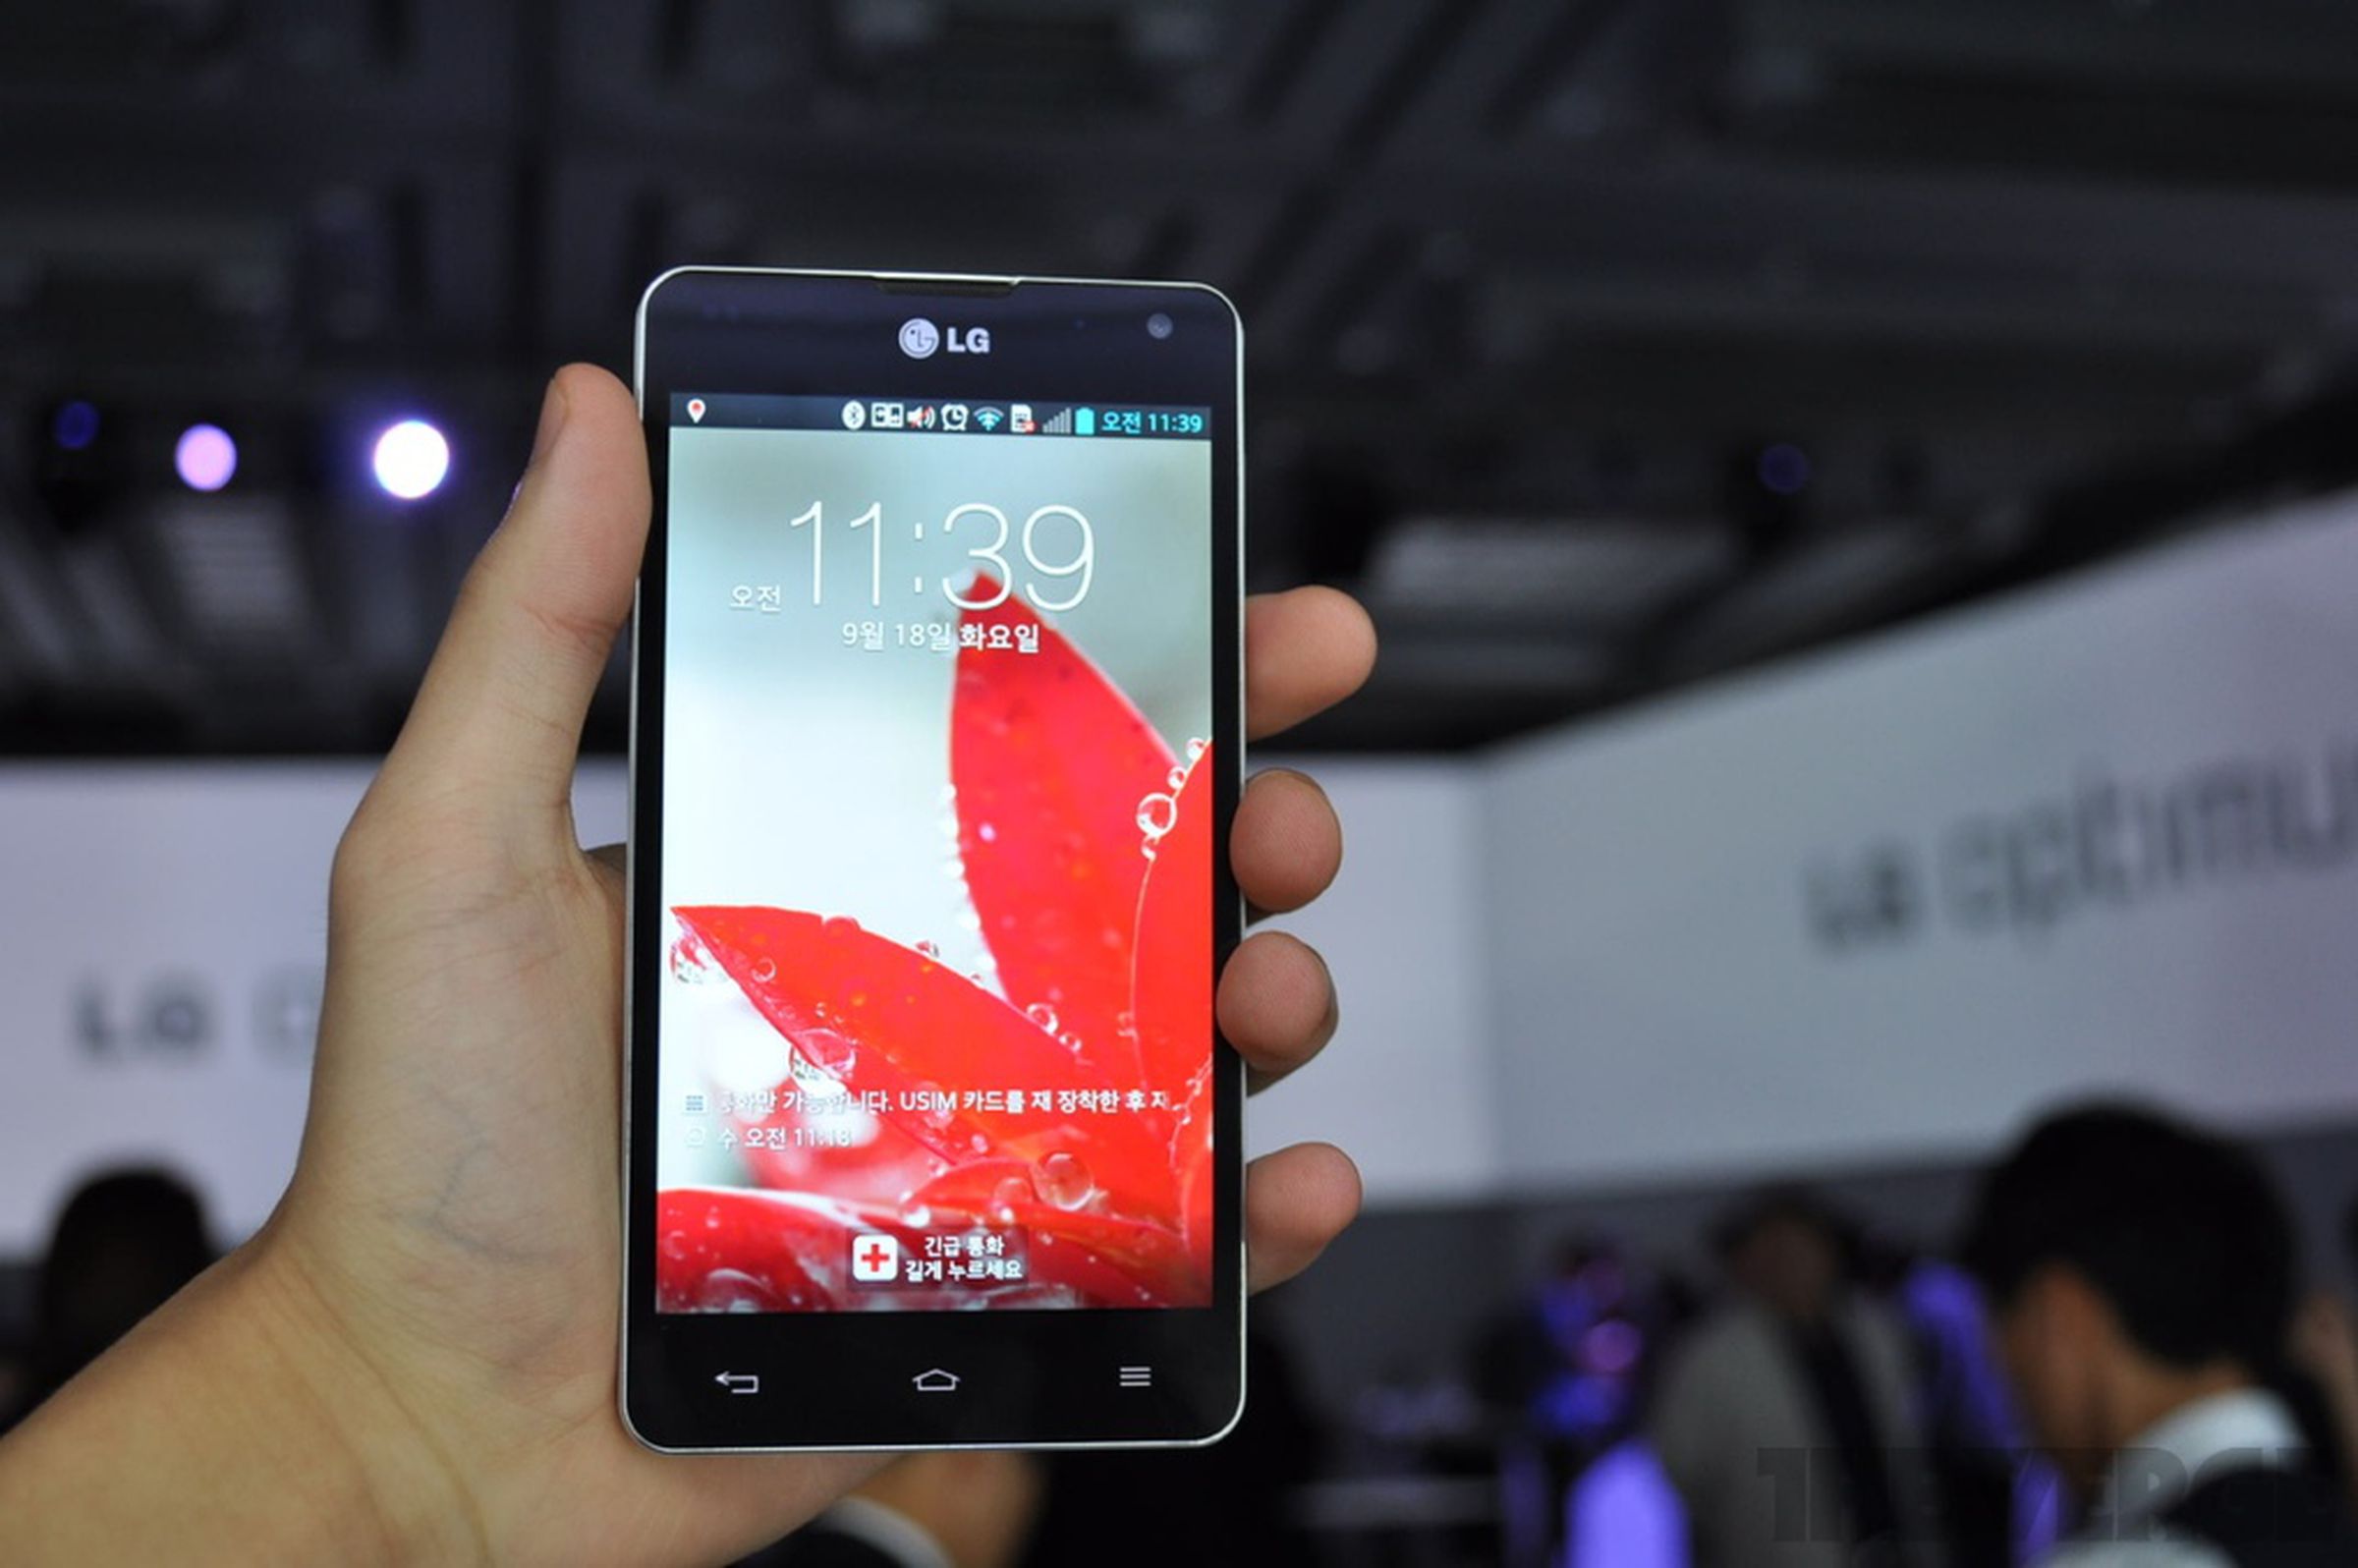 LG Optimus G hands-on images from Korea